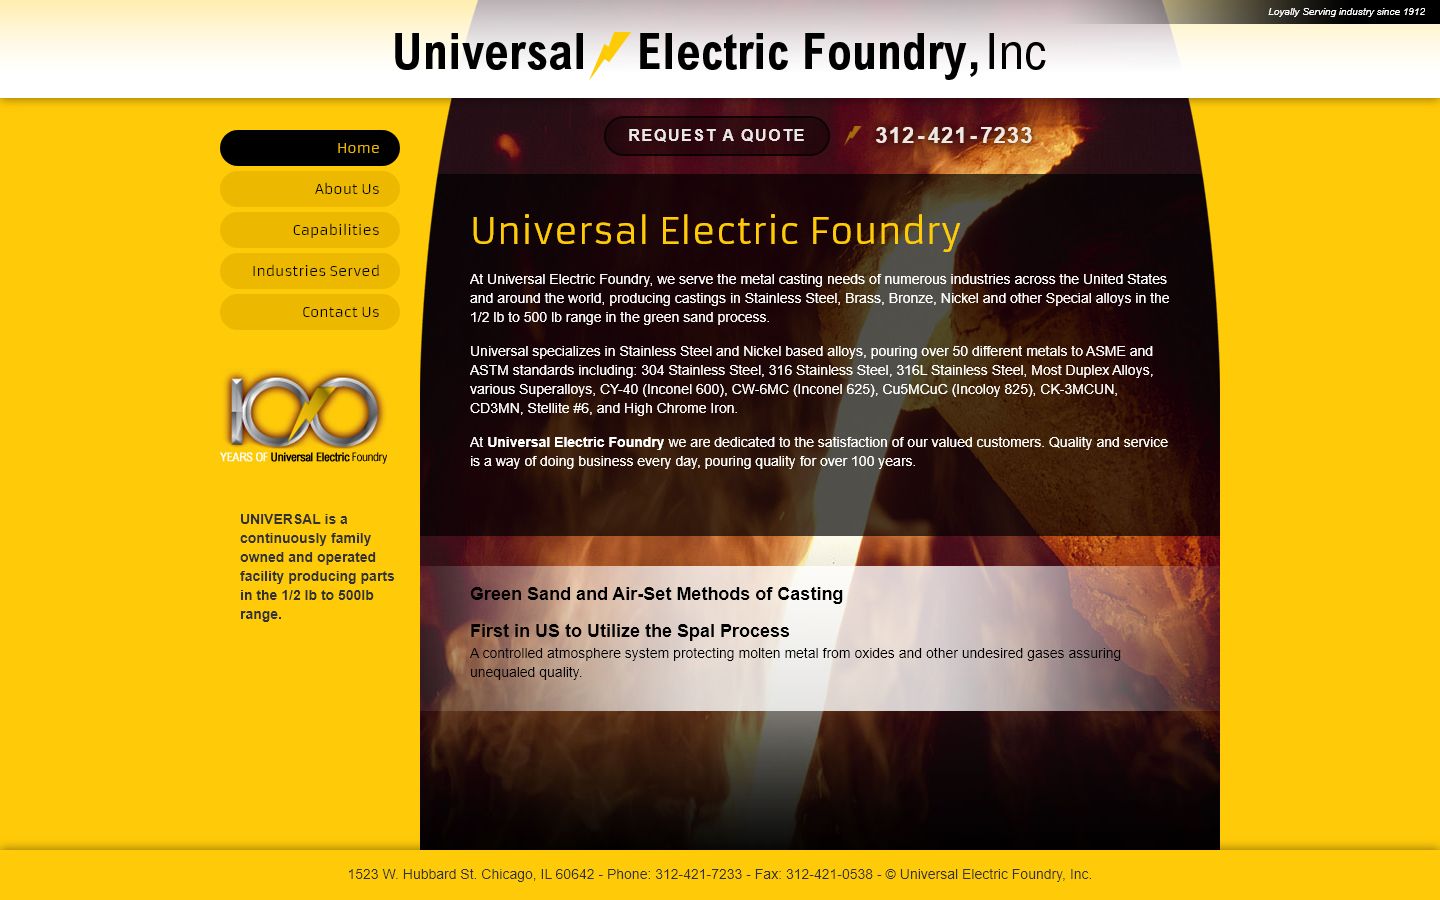 Universal Electric Foundry